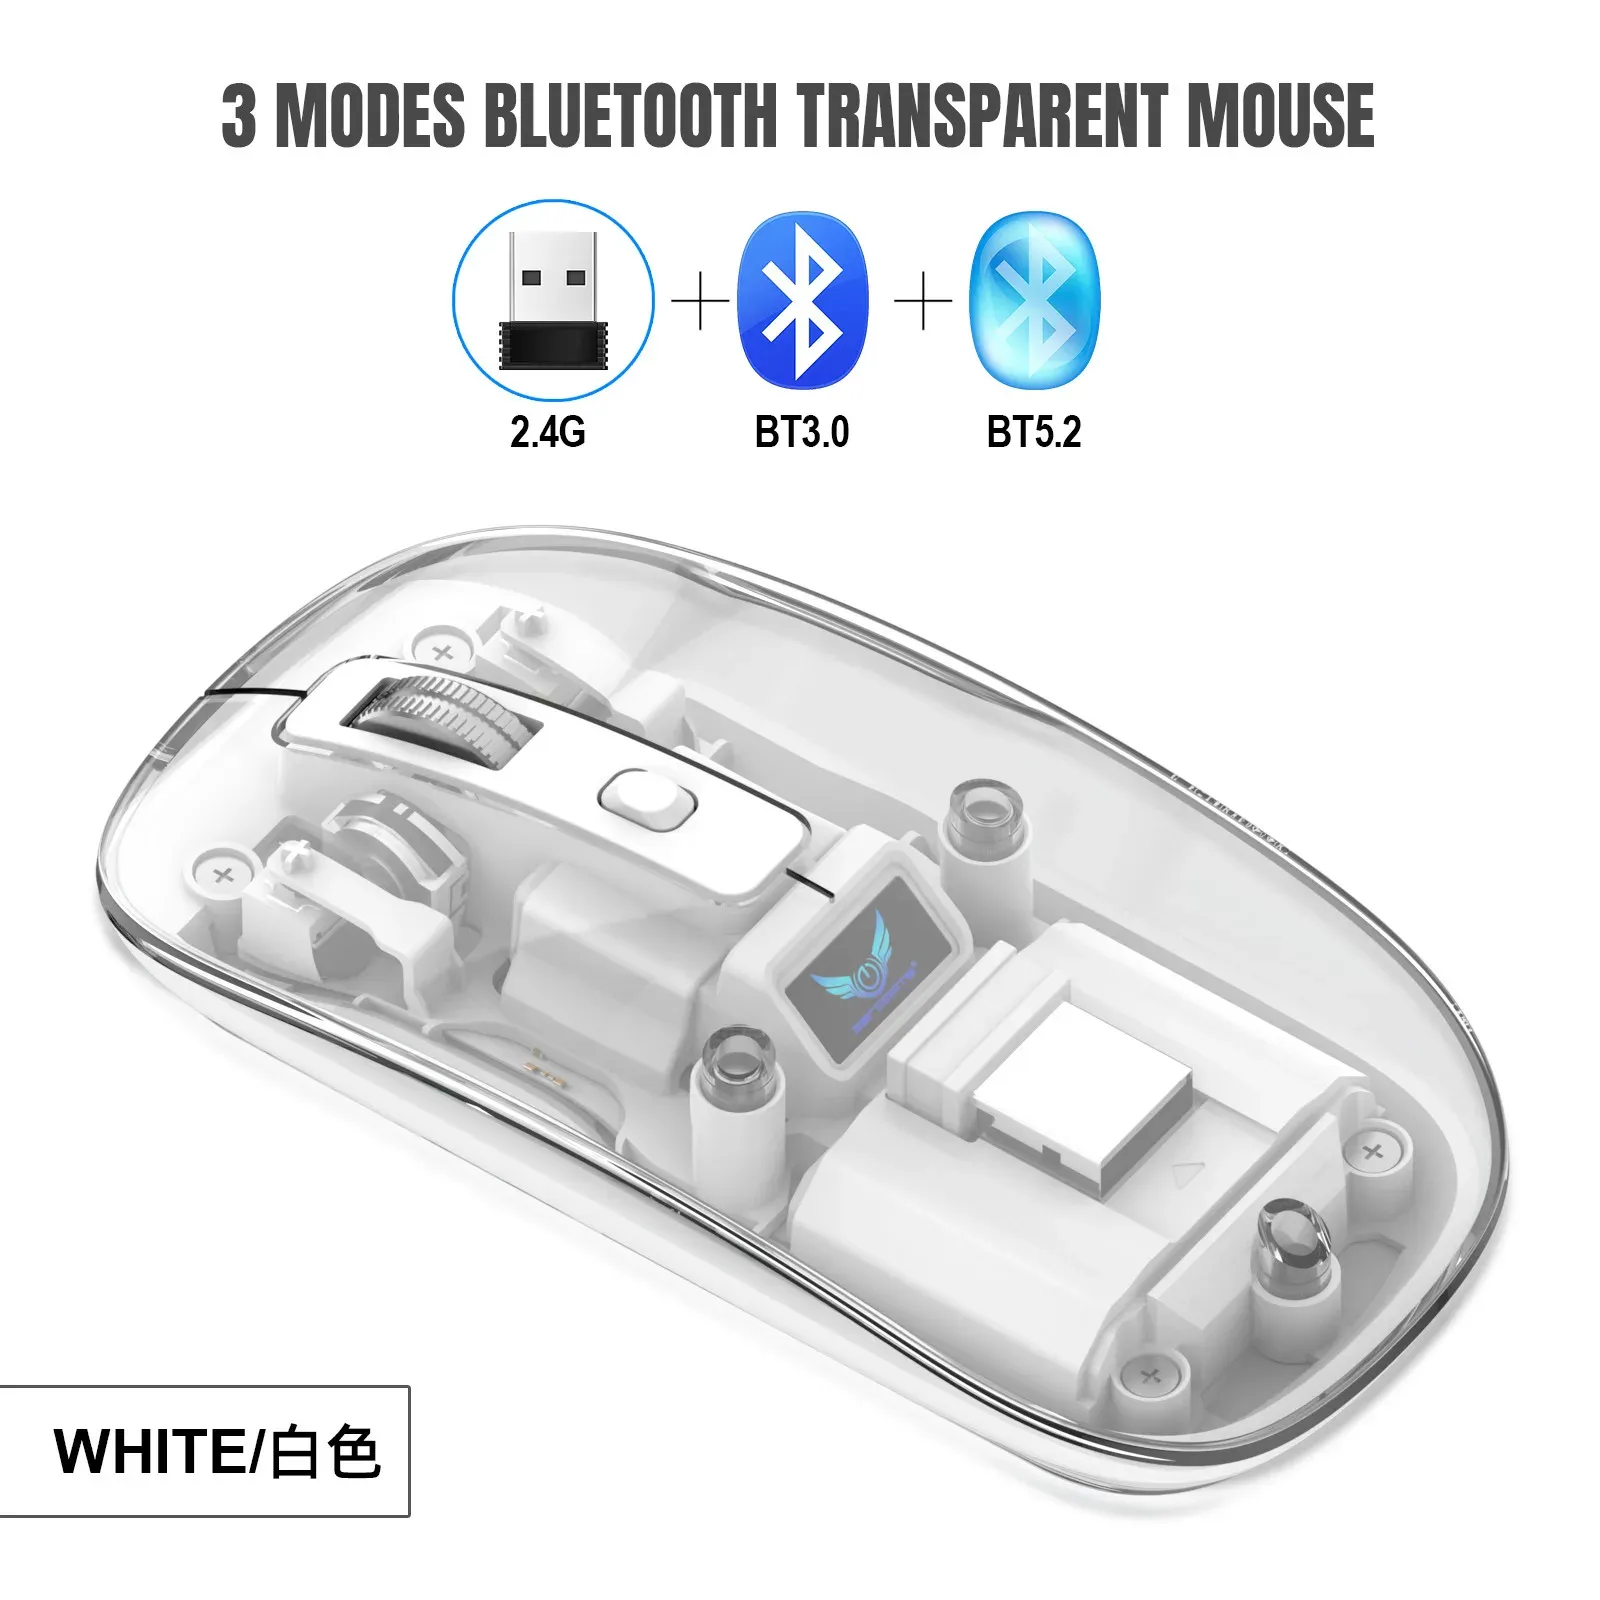 Mice Wireless Bluetooth Mouse Portable Rechargeable Transparent MouseFor Laptop IPad Tablet Notebook Mobile Phone Office Gaming Mouse